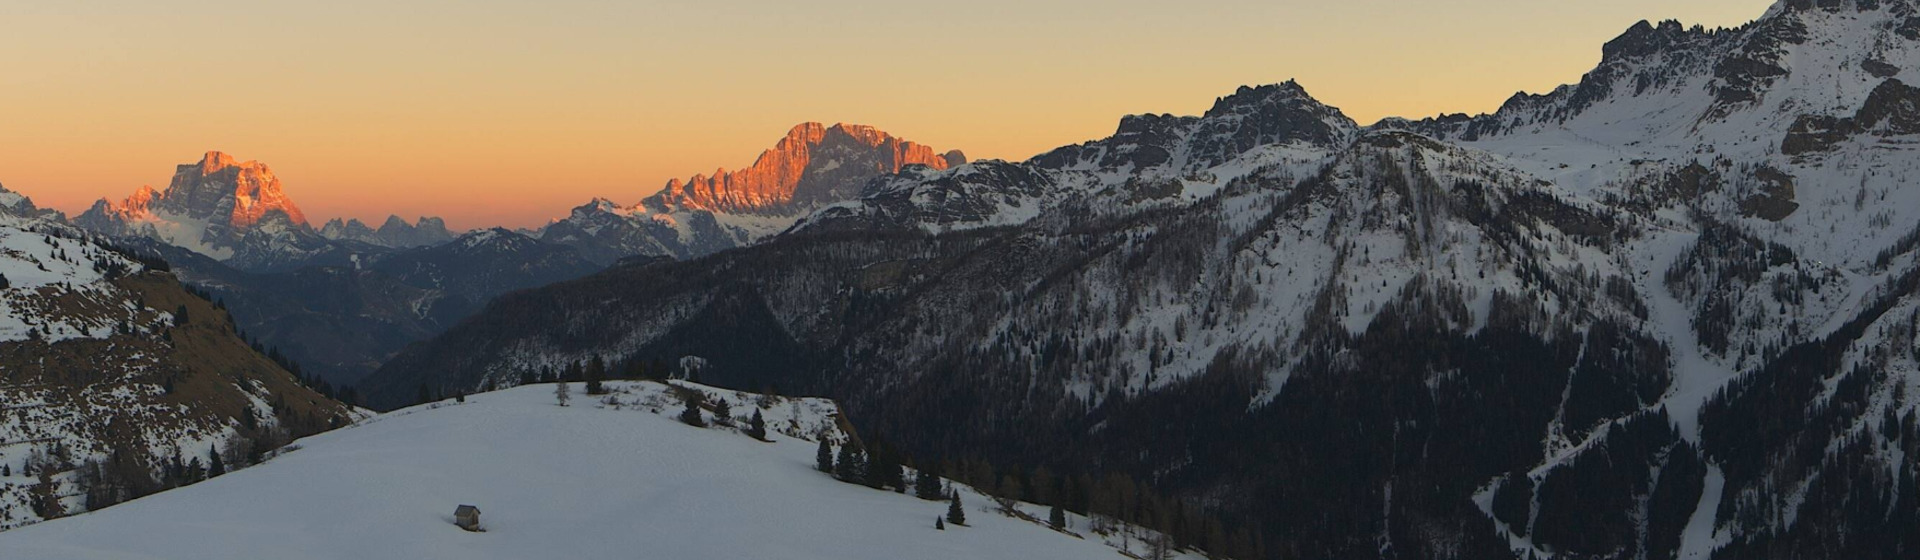 5 things to do on Valentine's Day in Arabba Dolomites